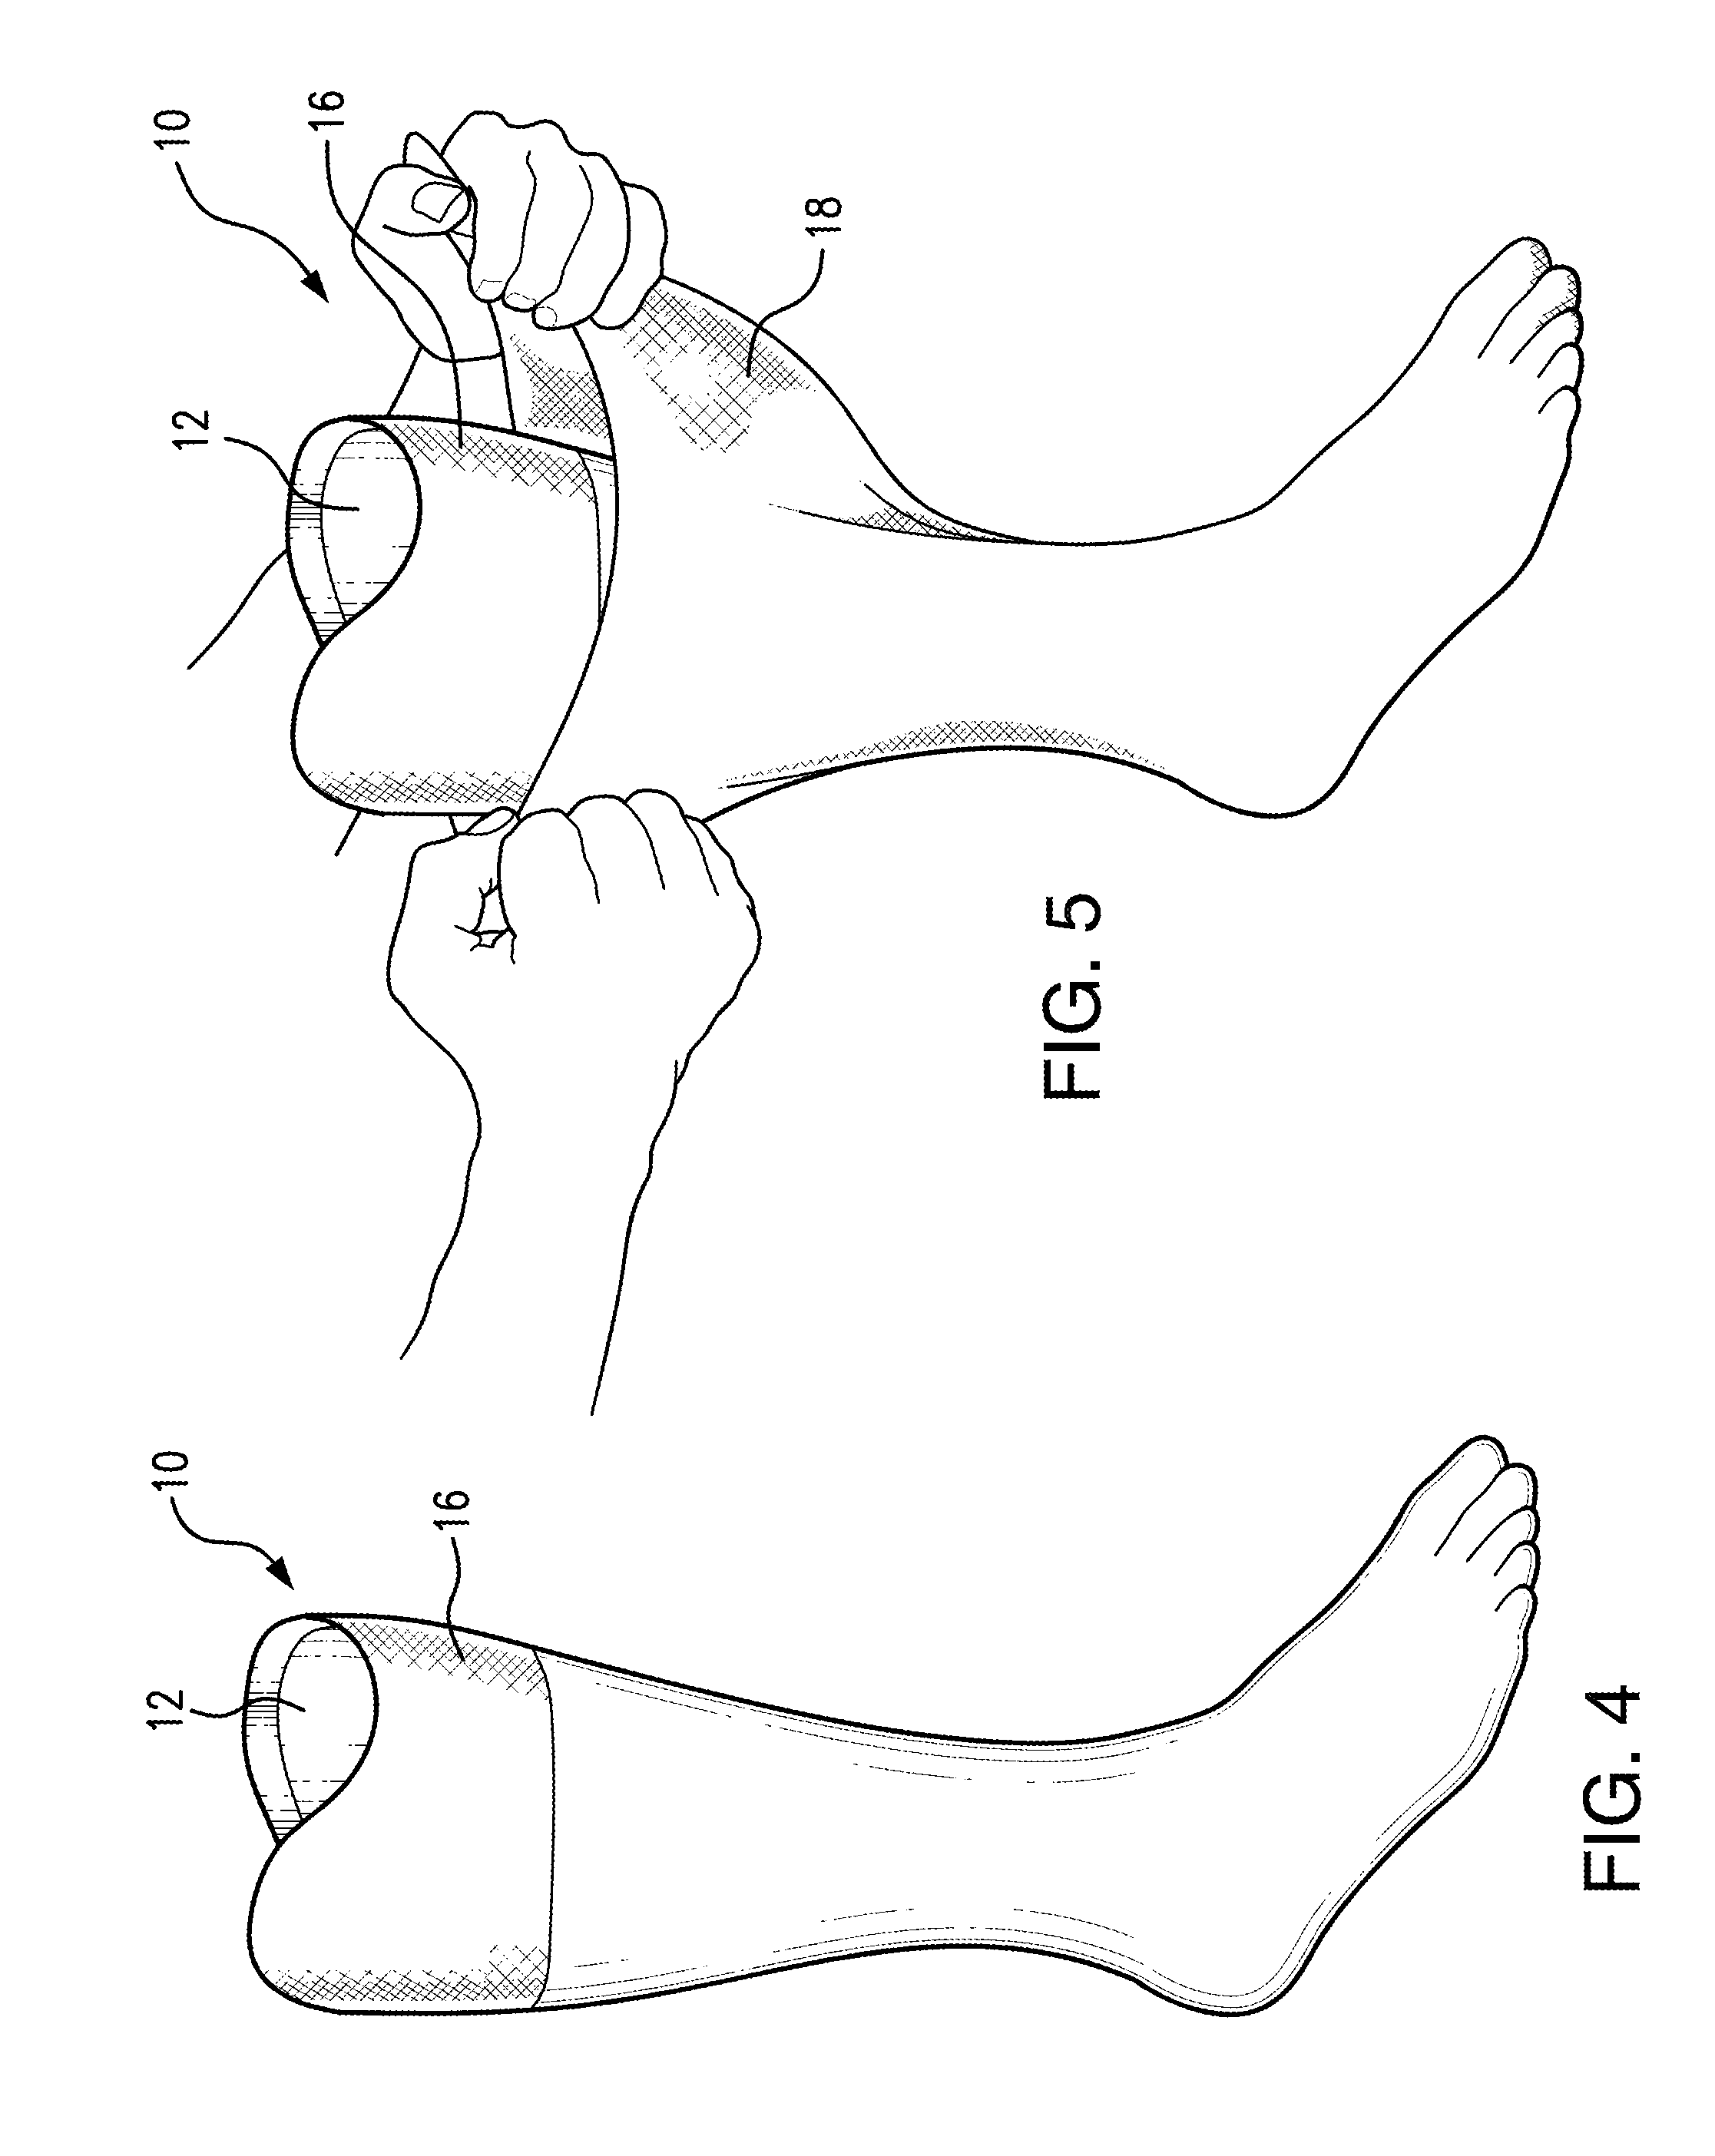 Skin-Like Prosthesis Cover Having Substantially Permanently Attached and Releasably Attached Portions